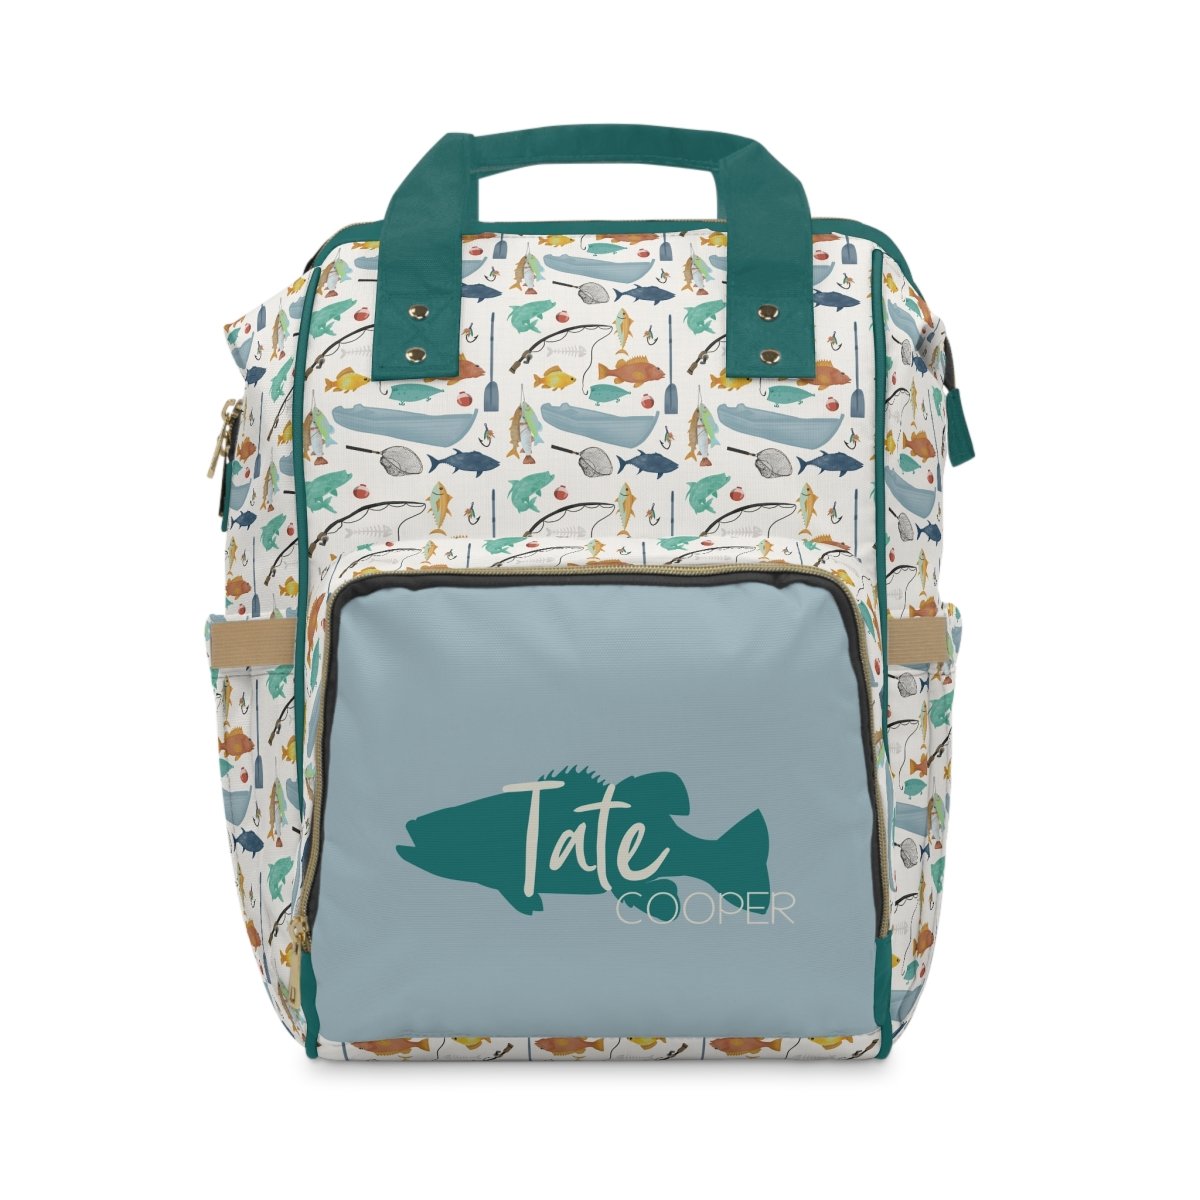 Fishing Time Personalized Backpack Diaper Bag - Fishing Time, gender_boy, text